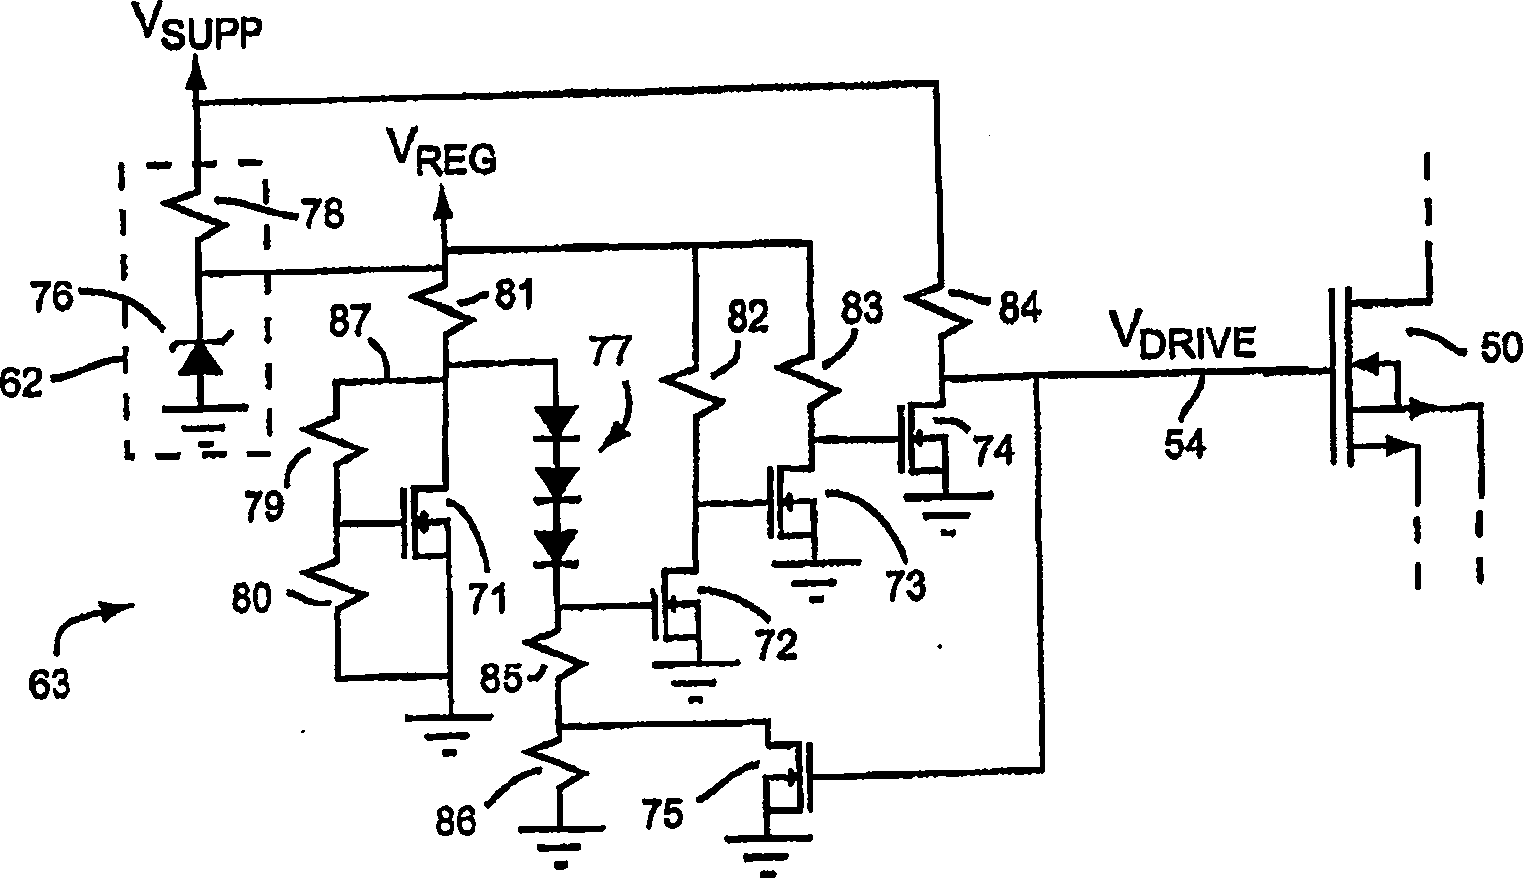 Integrated surge current limiter circuit and method